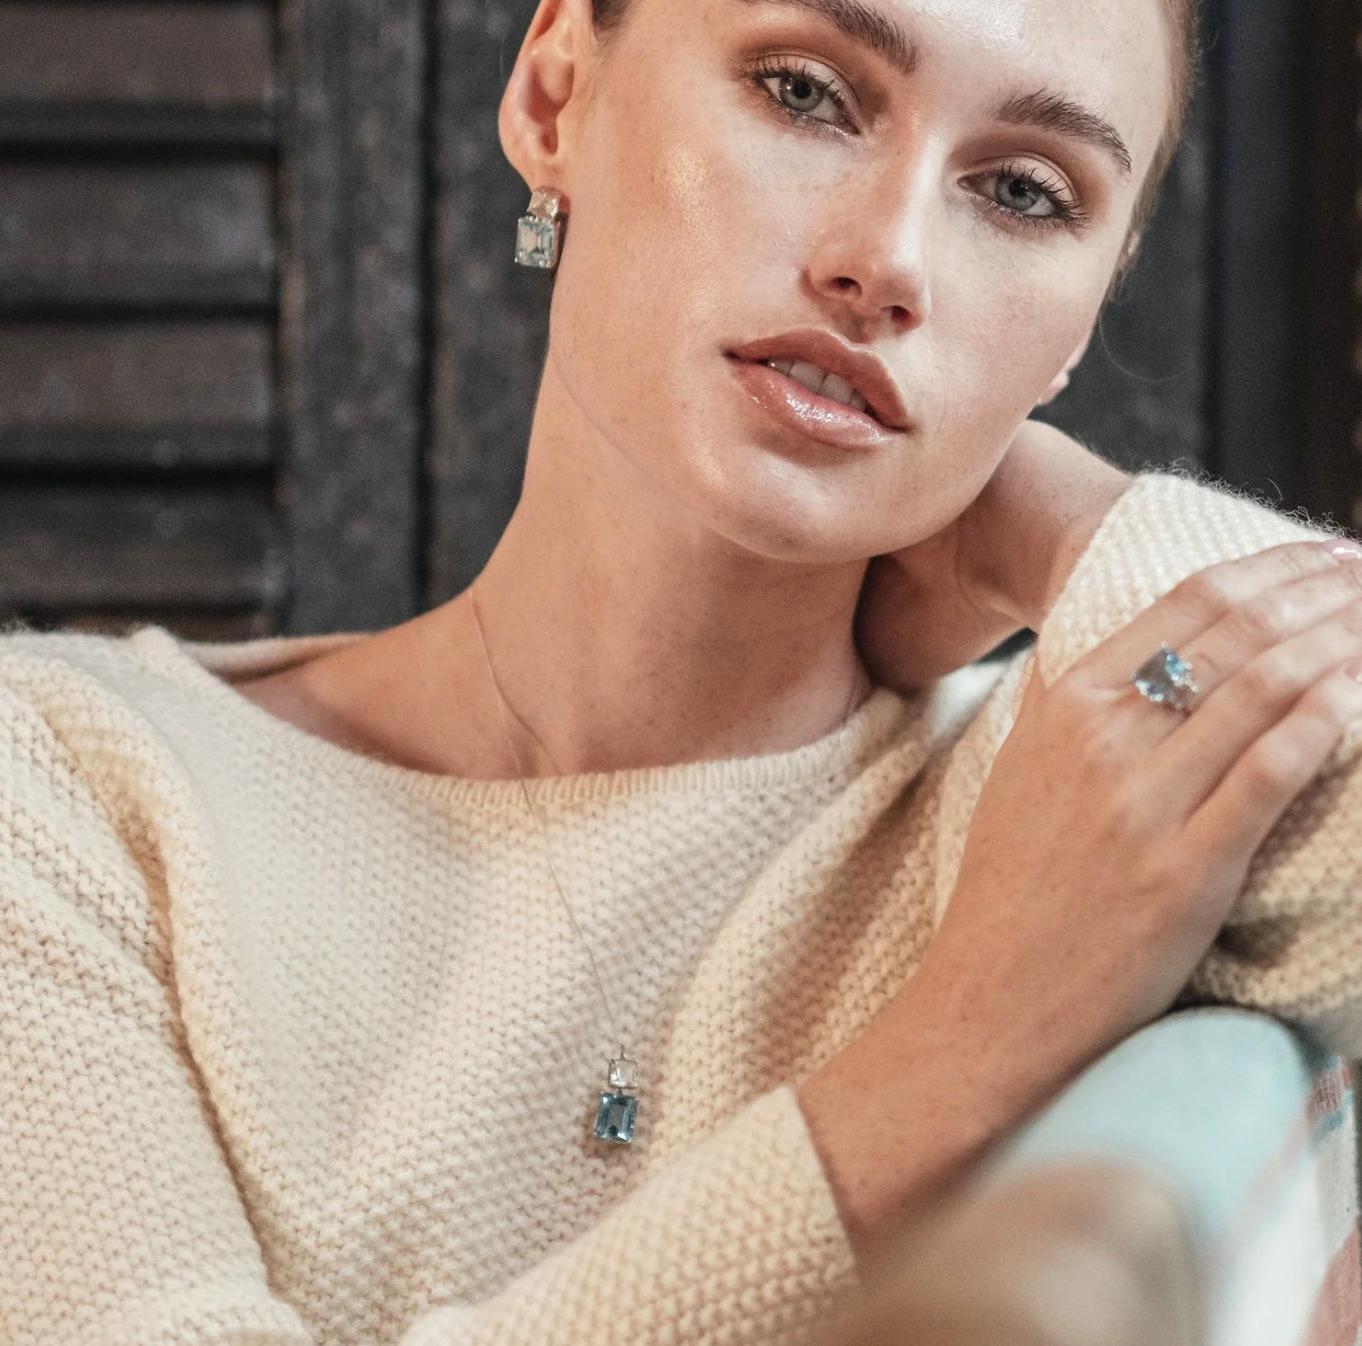 These gorgeous 9ct white gold gemstone earrings from the Andalusian Collection feature two exquisite octagon cut stones: sparkling white and sky blue topaz, inspired by the hues of the Mediterranean Sea.

The Andalusian-inspired luxury jewellery